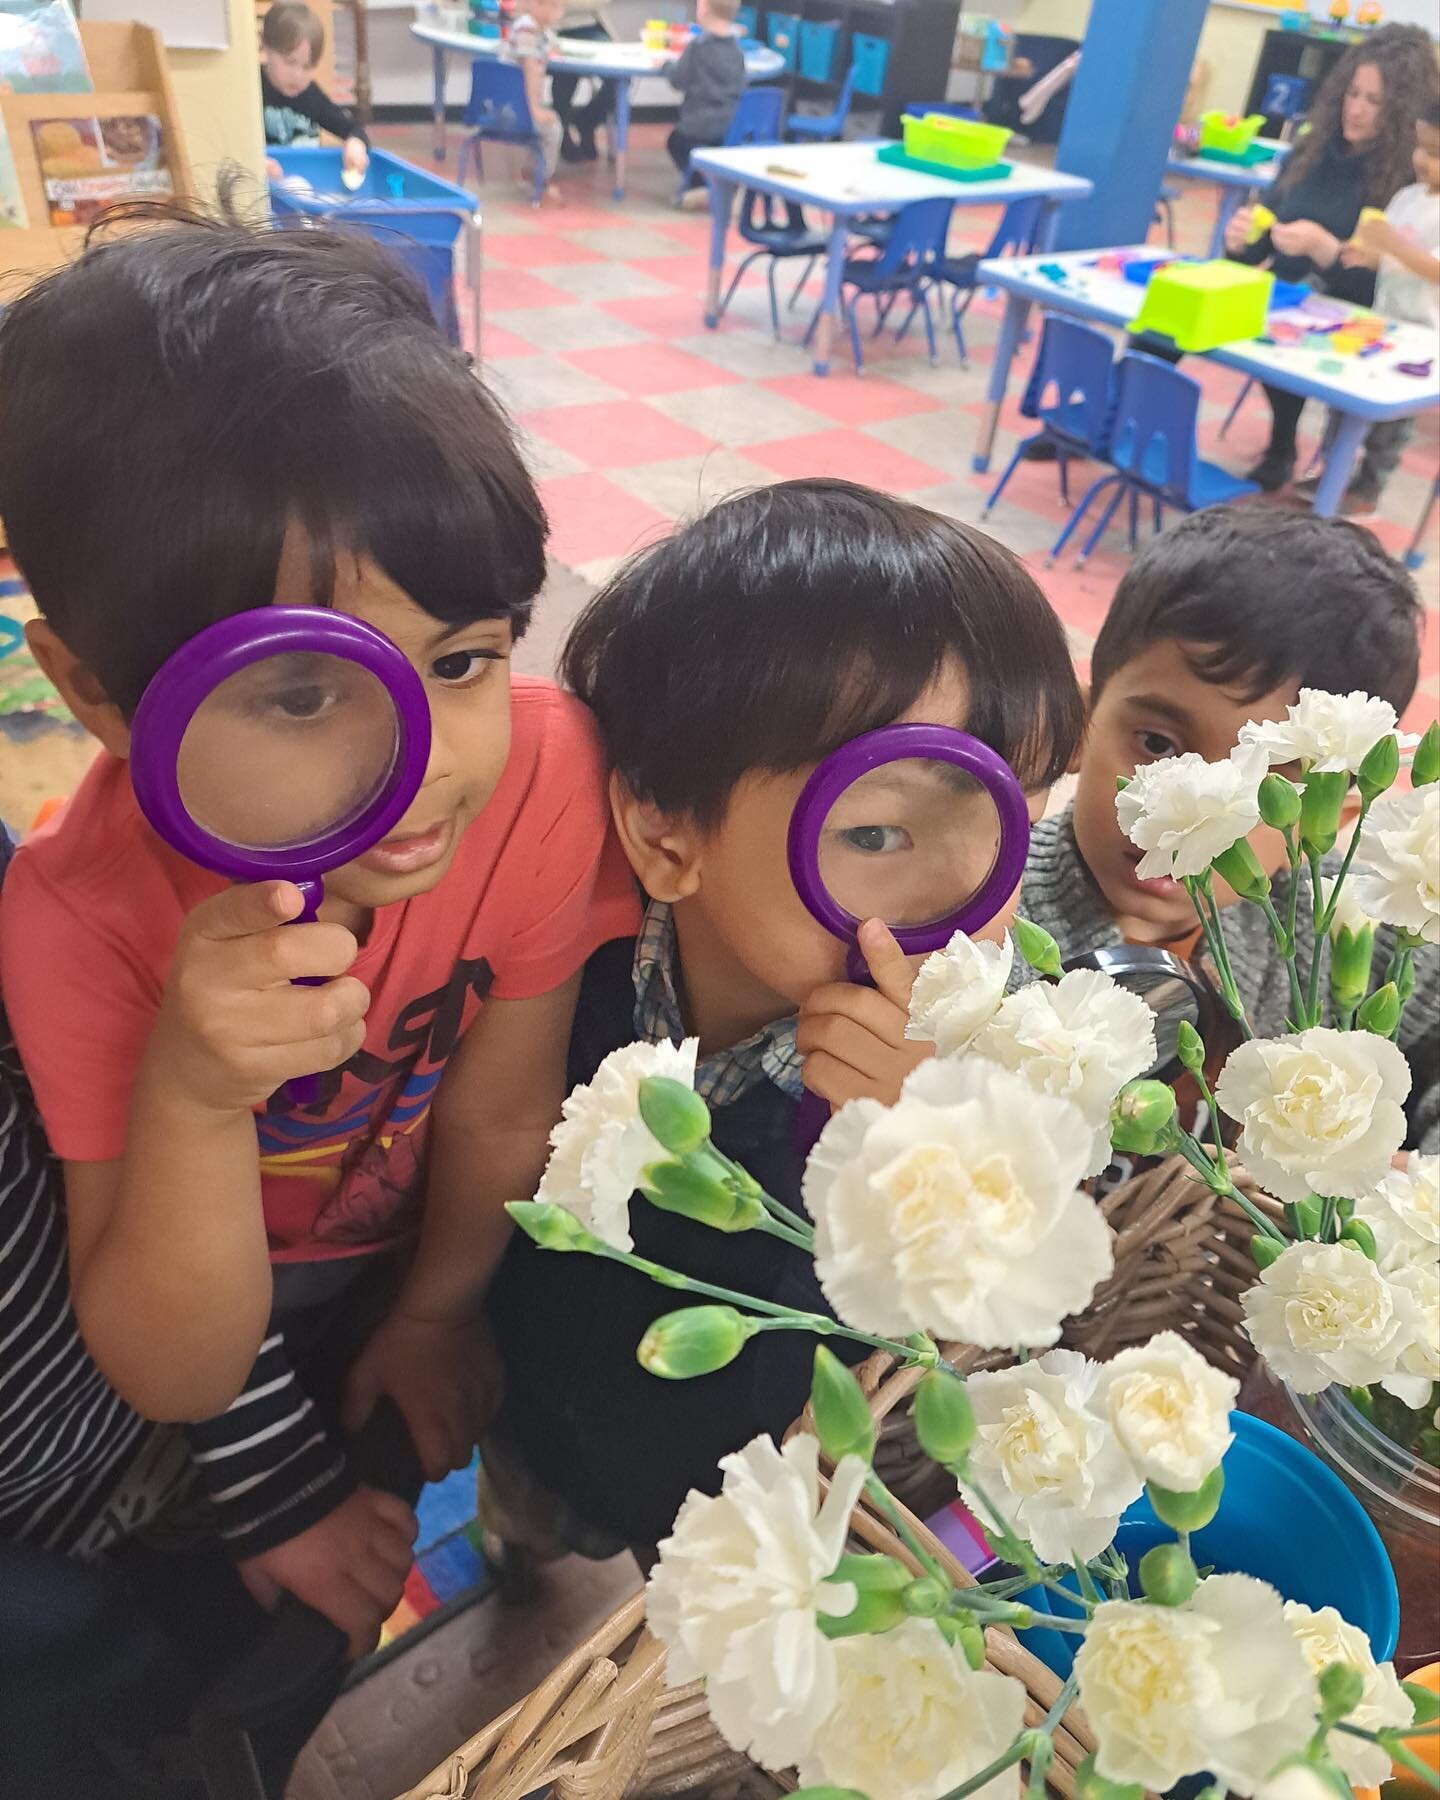 The Sunnyside Pre-Kindergarten and Kindergarten Enhancement classes are doing an experiment with white carnations. We put them into colored water and are watching to see what happens next!
*
*
*
*
*
*
*
#prekindergarten #kindergarten #preschool #pres